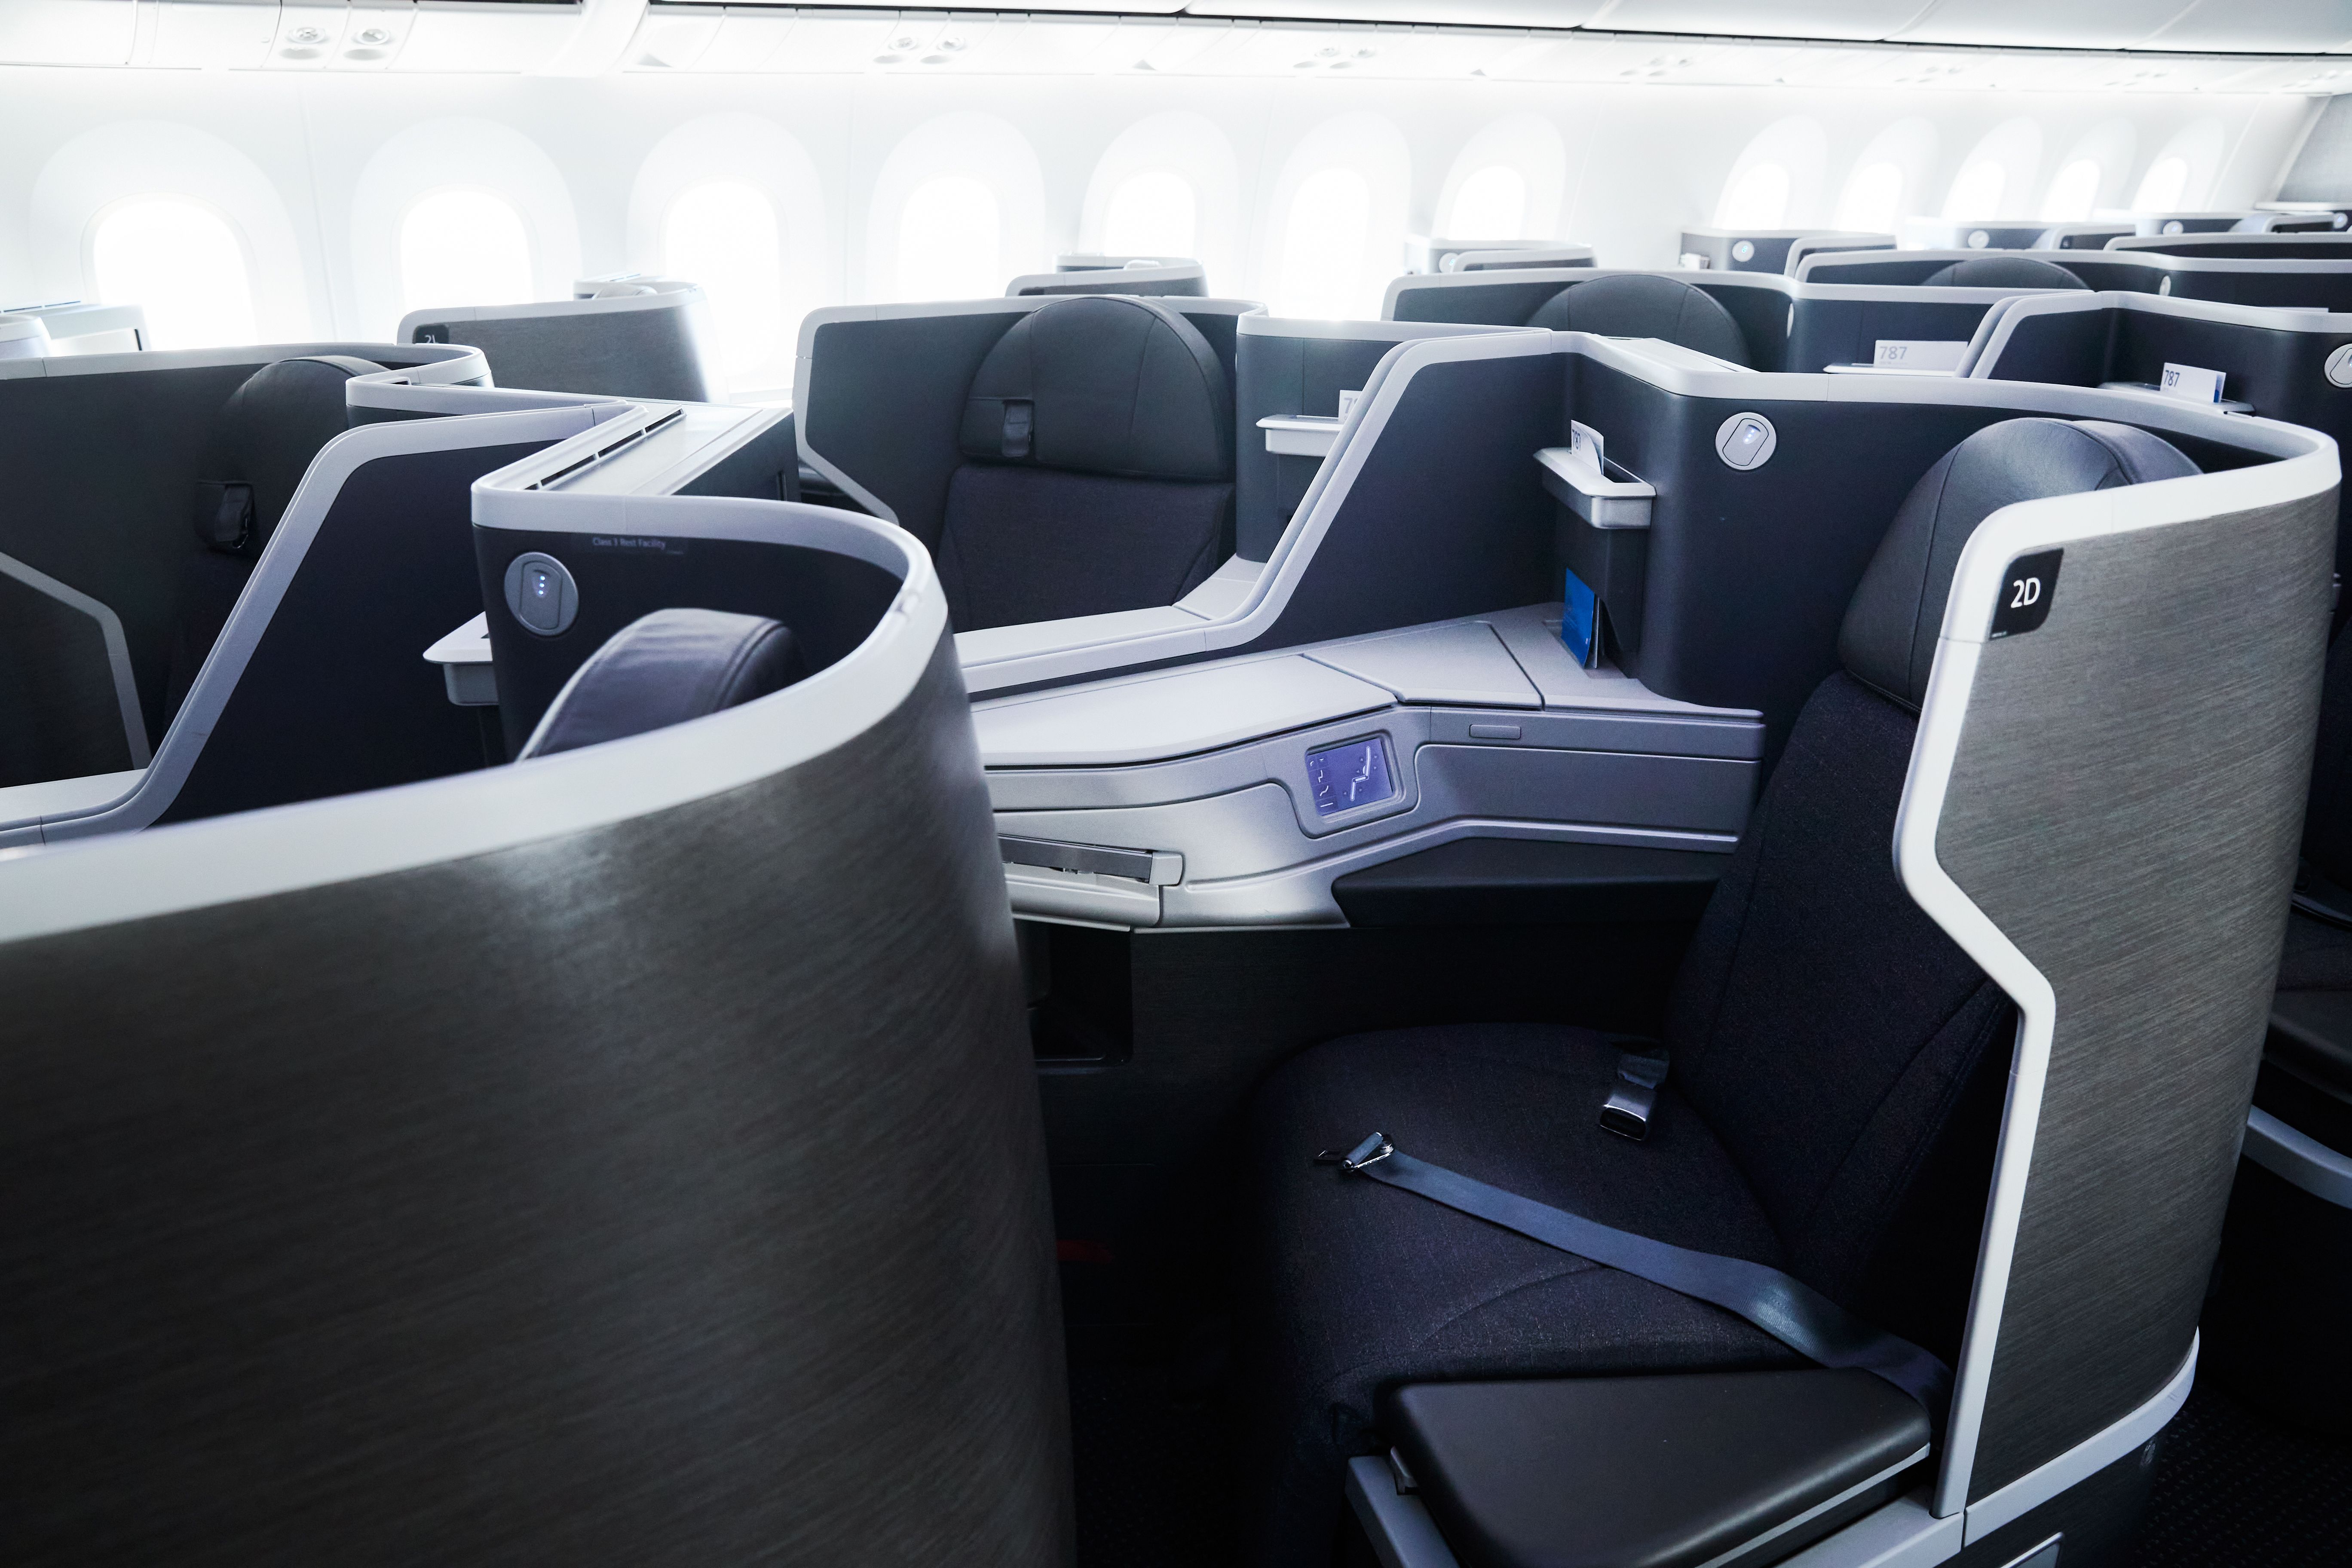 Several Seats of an American Airlines widebody aircraft Flagship Business cabin.